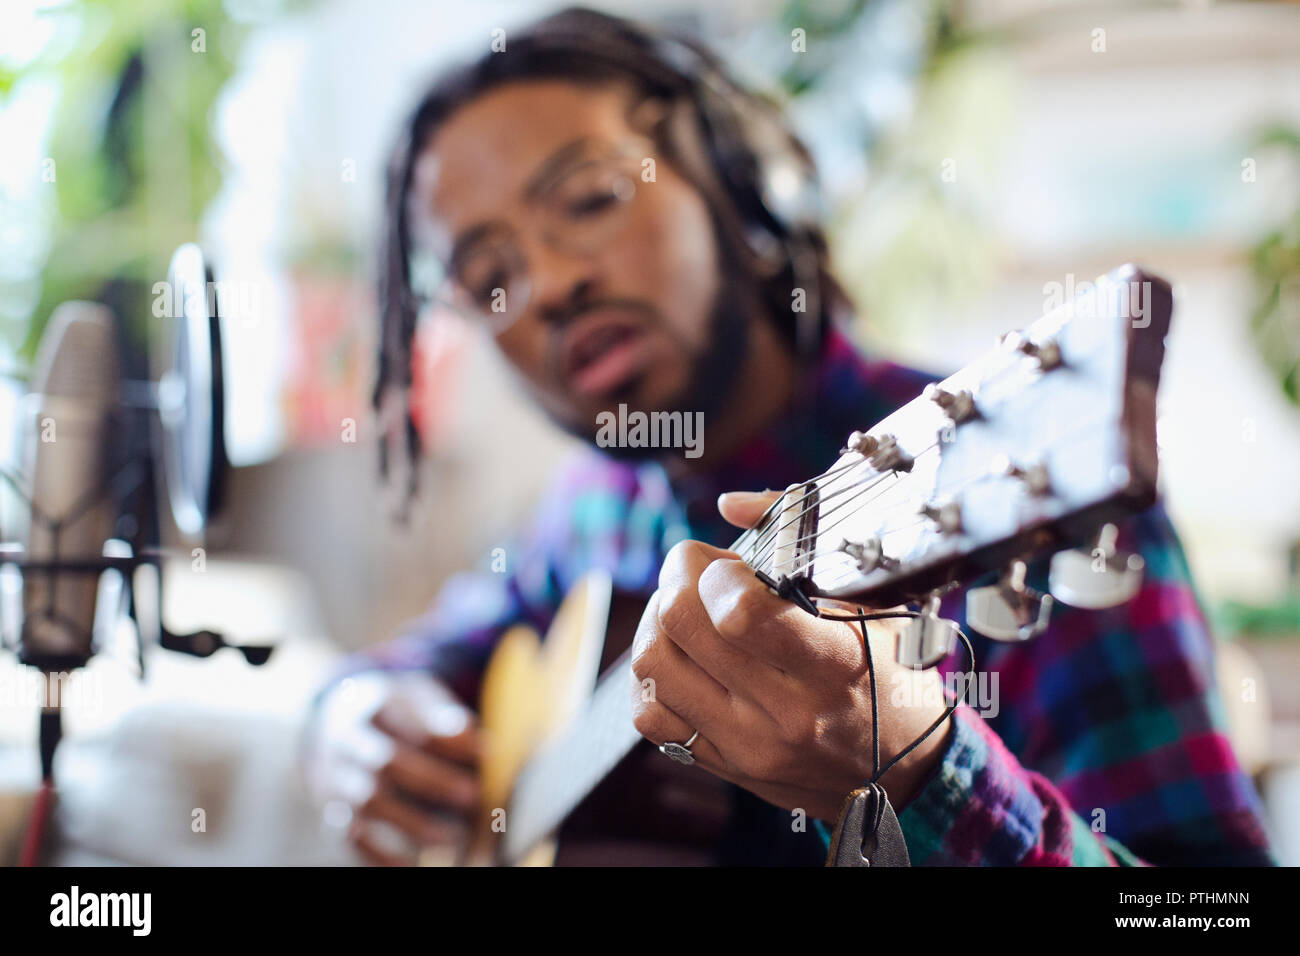 Young male musician recording music, playing guitar at microphone Stock Photo